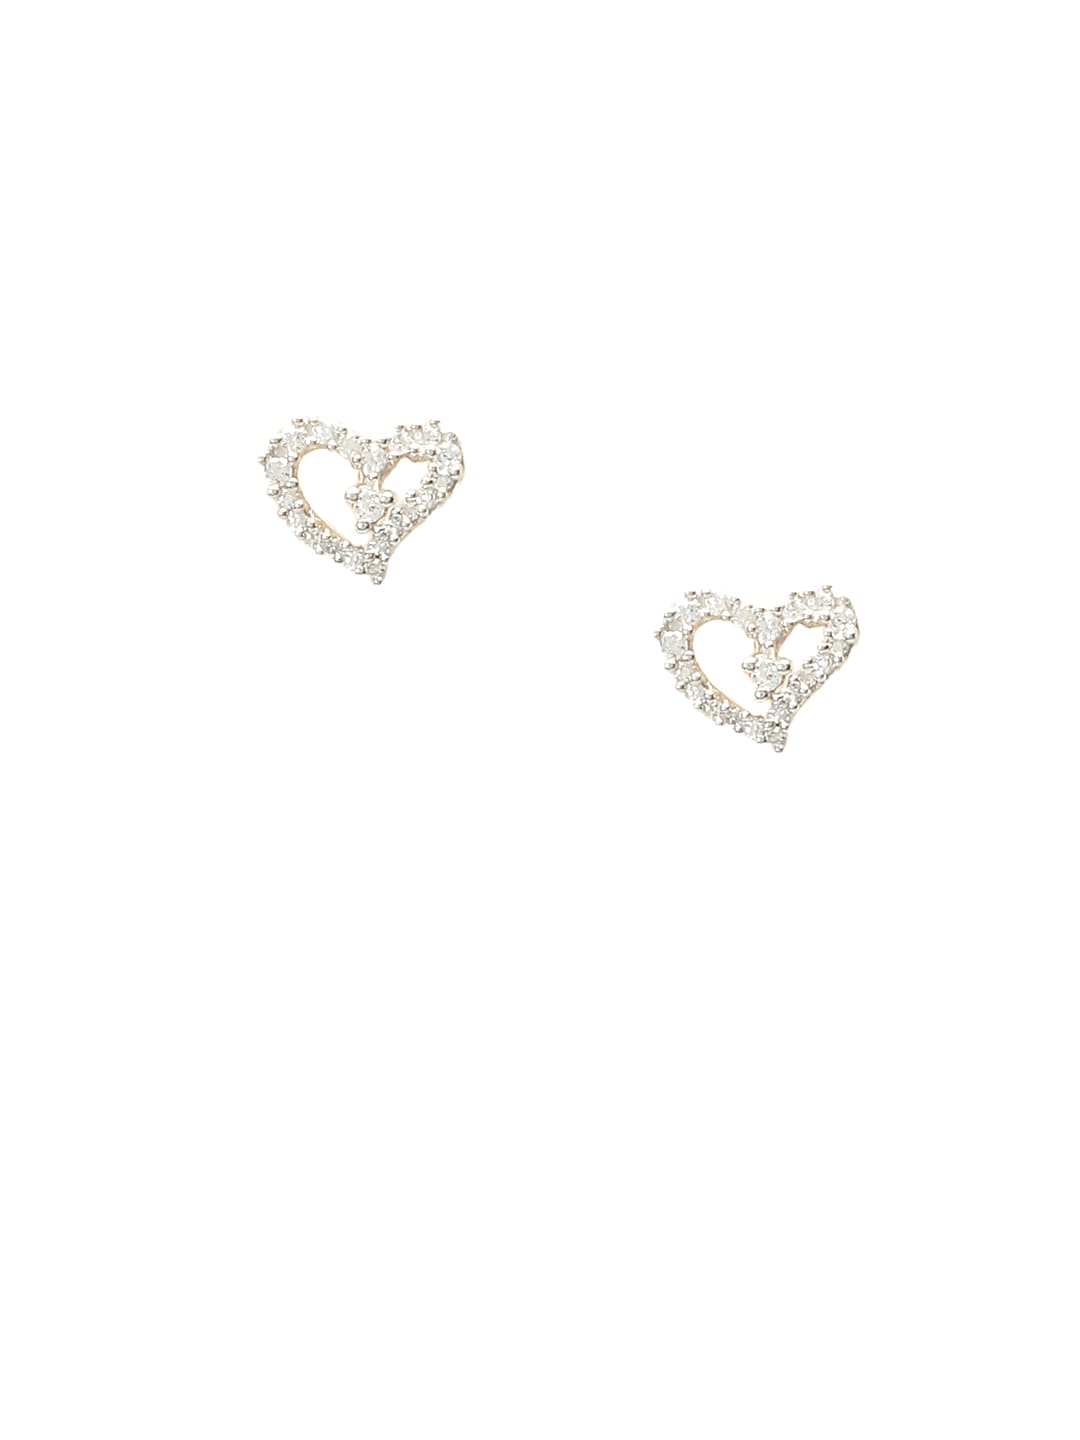 Lucera Gold Plated Earrings